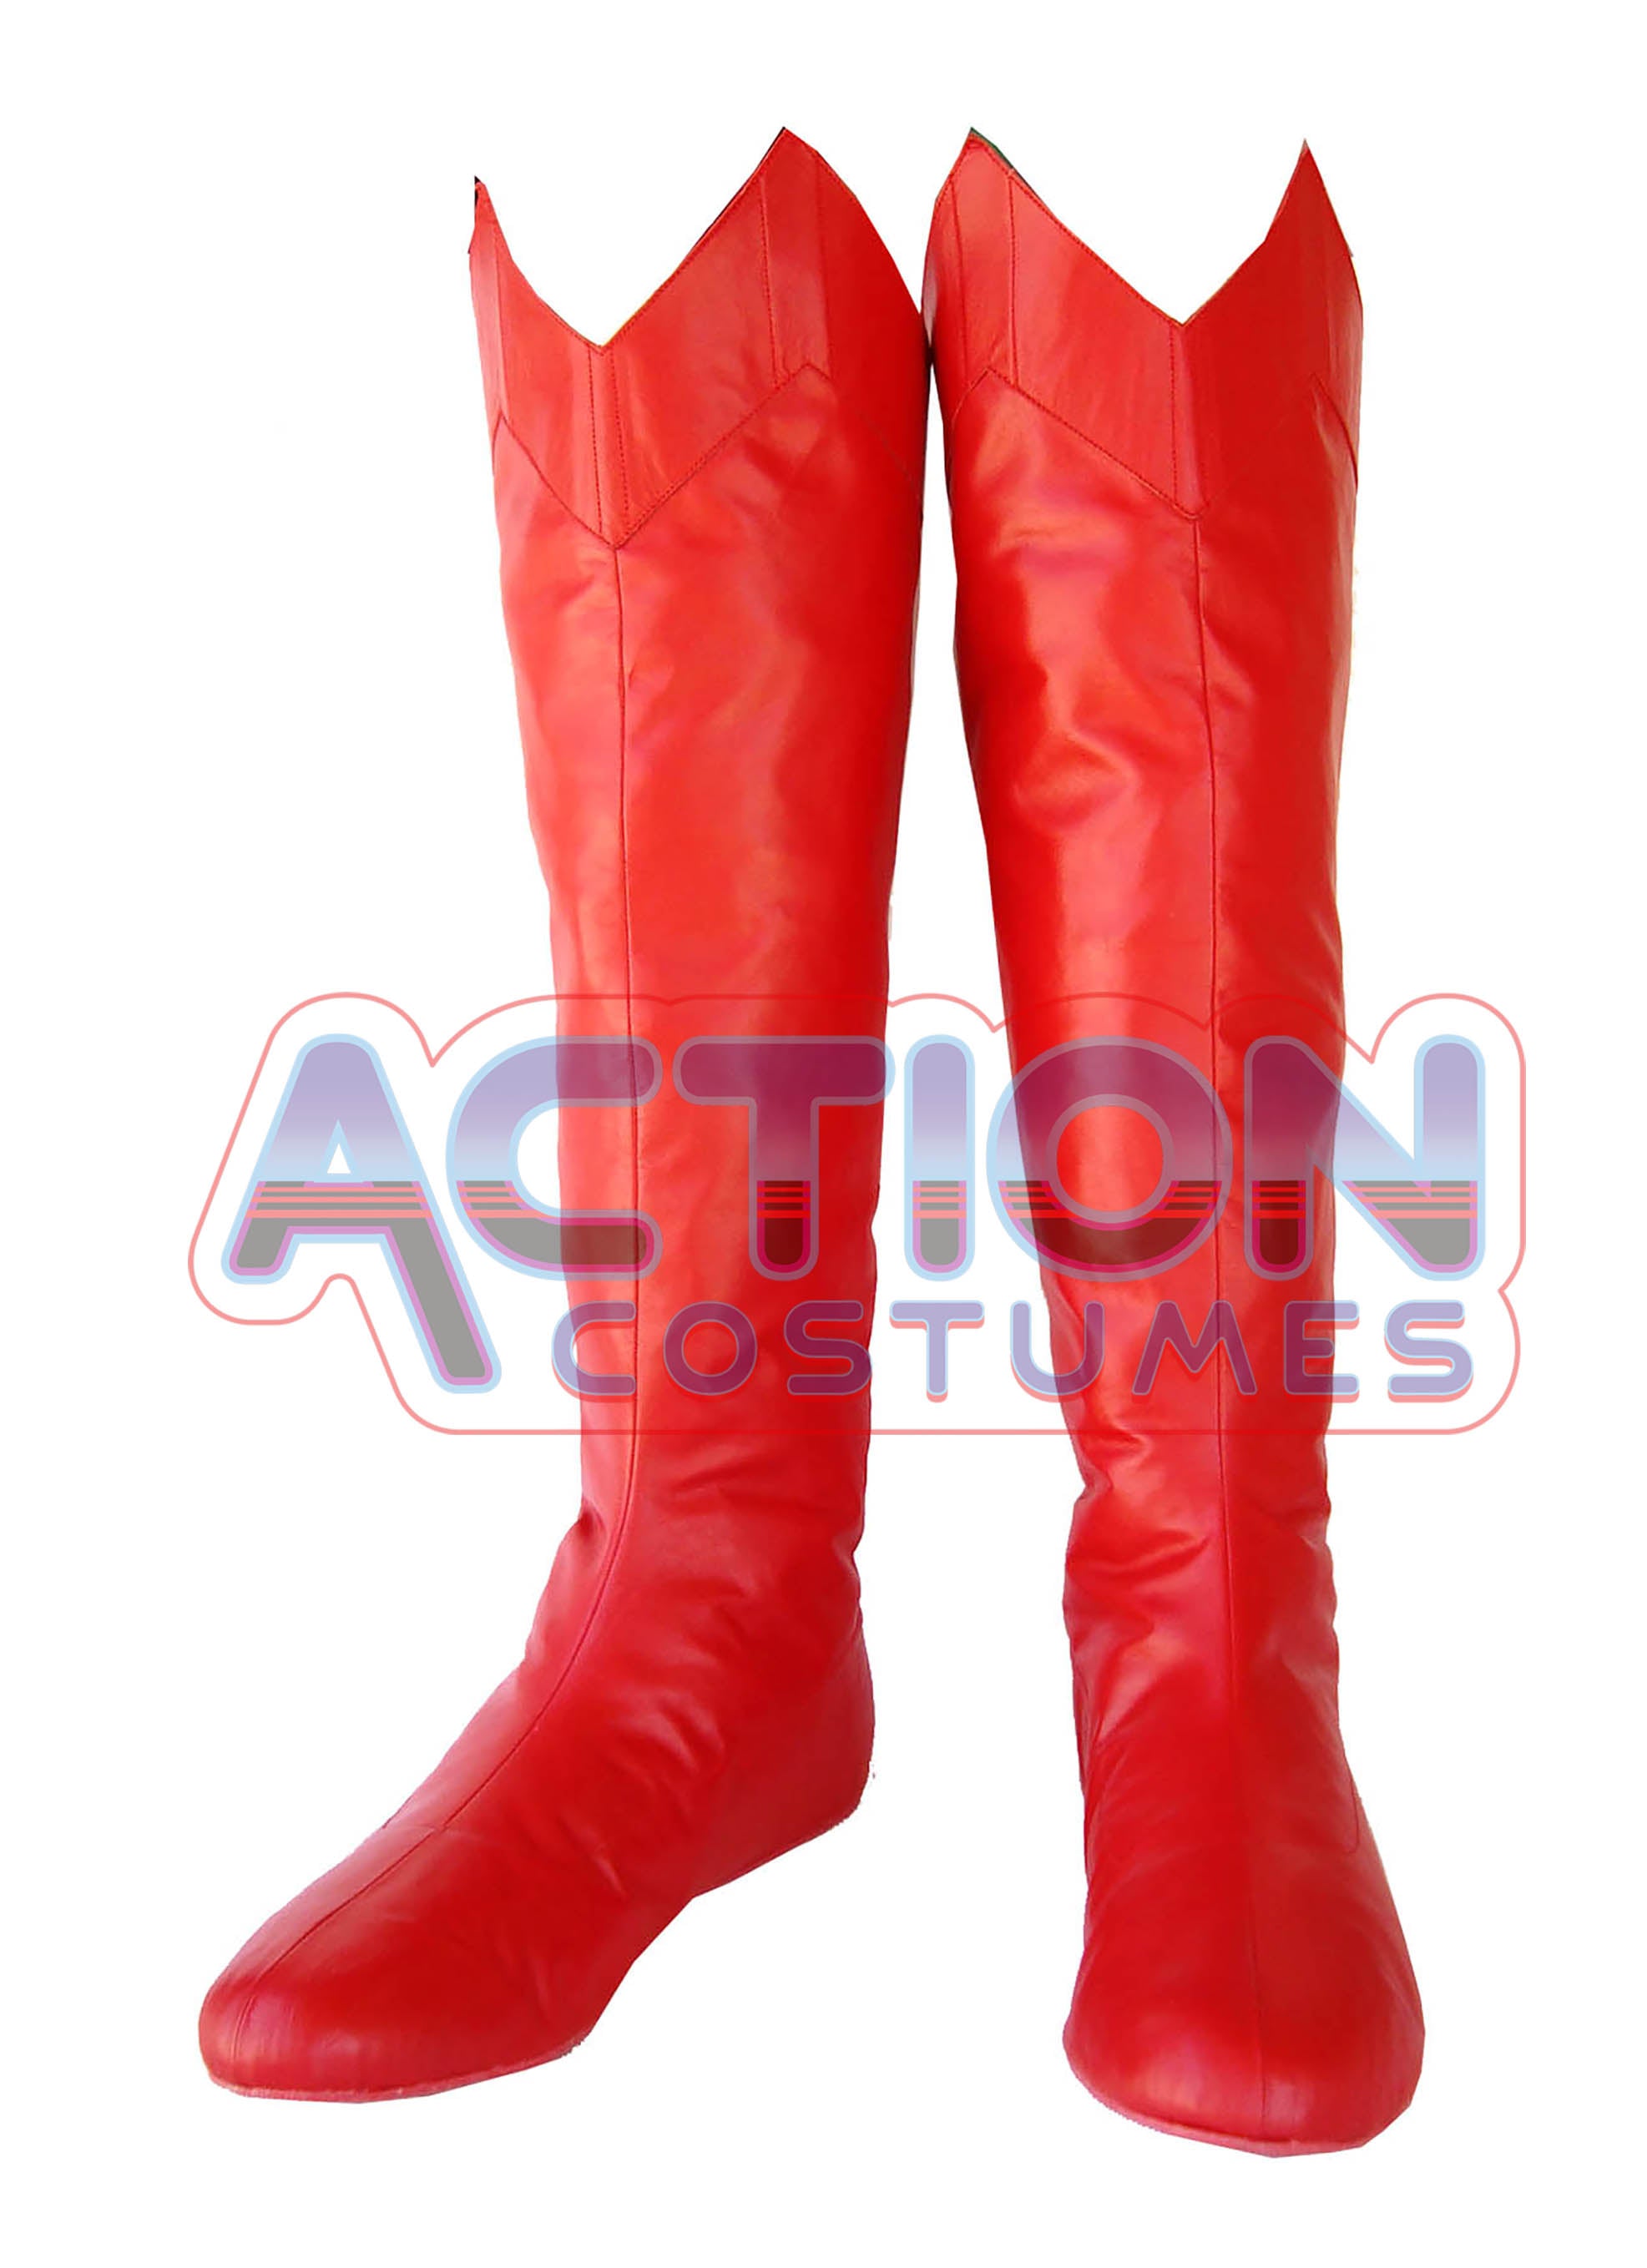 superman-deluxe-boots-70s-style-1